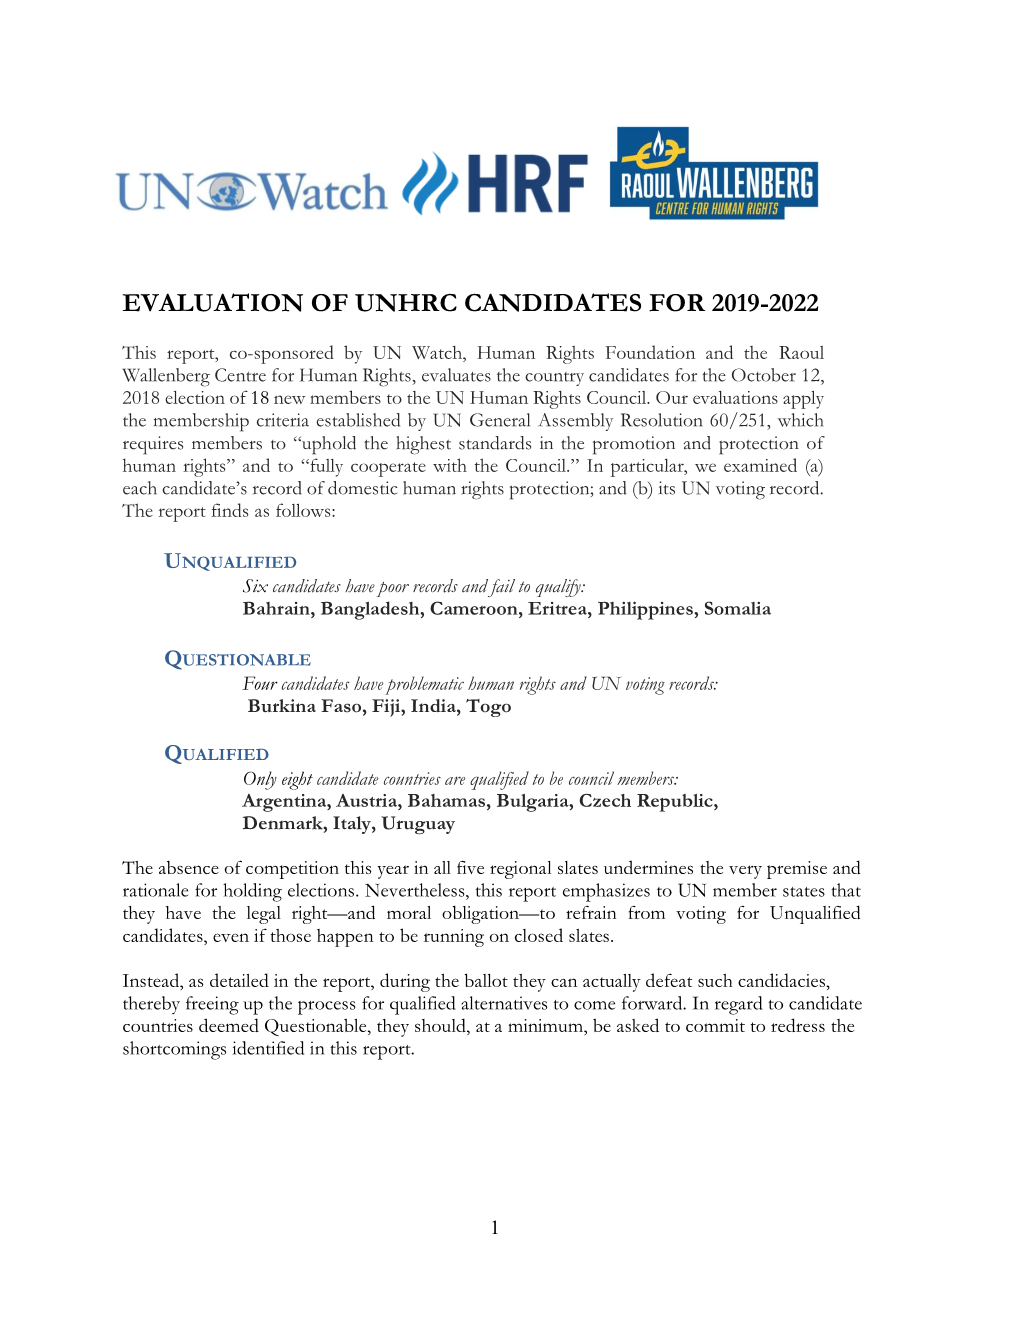 Evaluation of Unhrc Candidates for 2019-2022